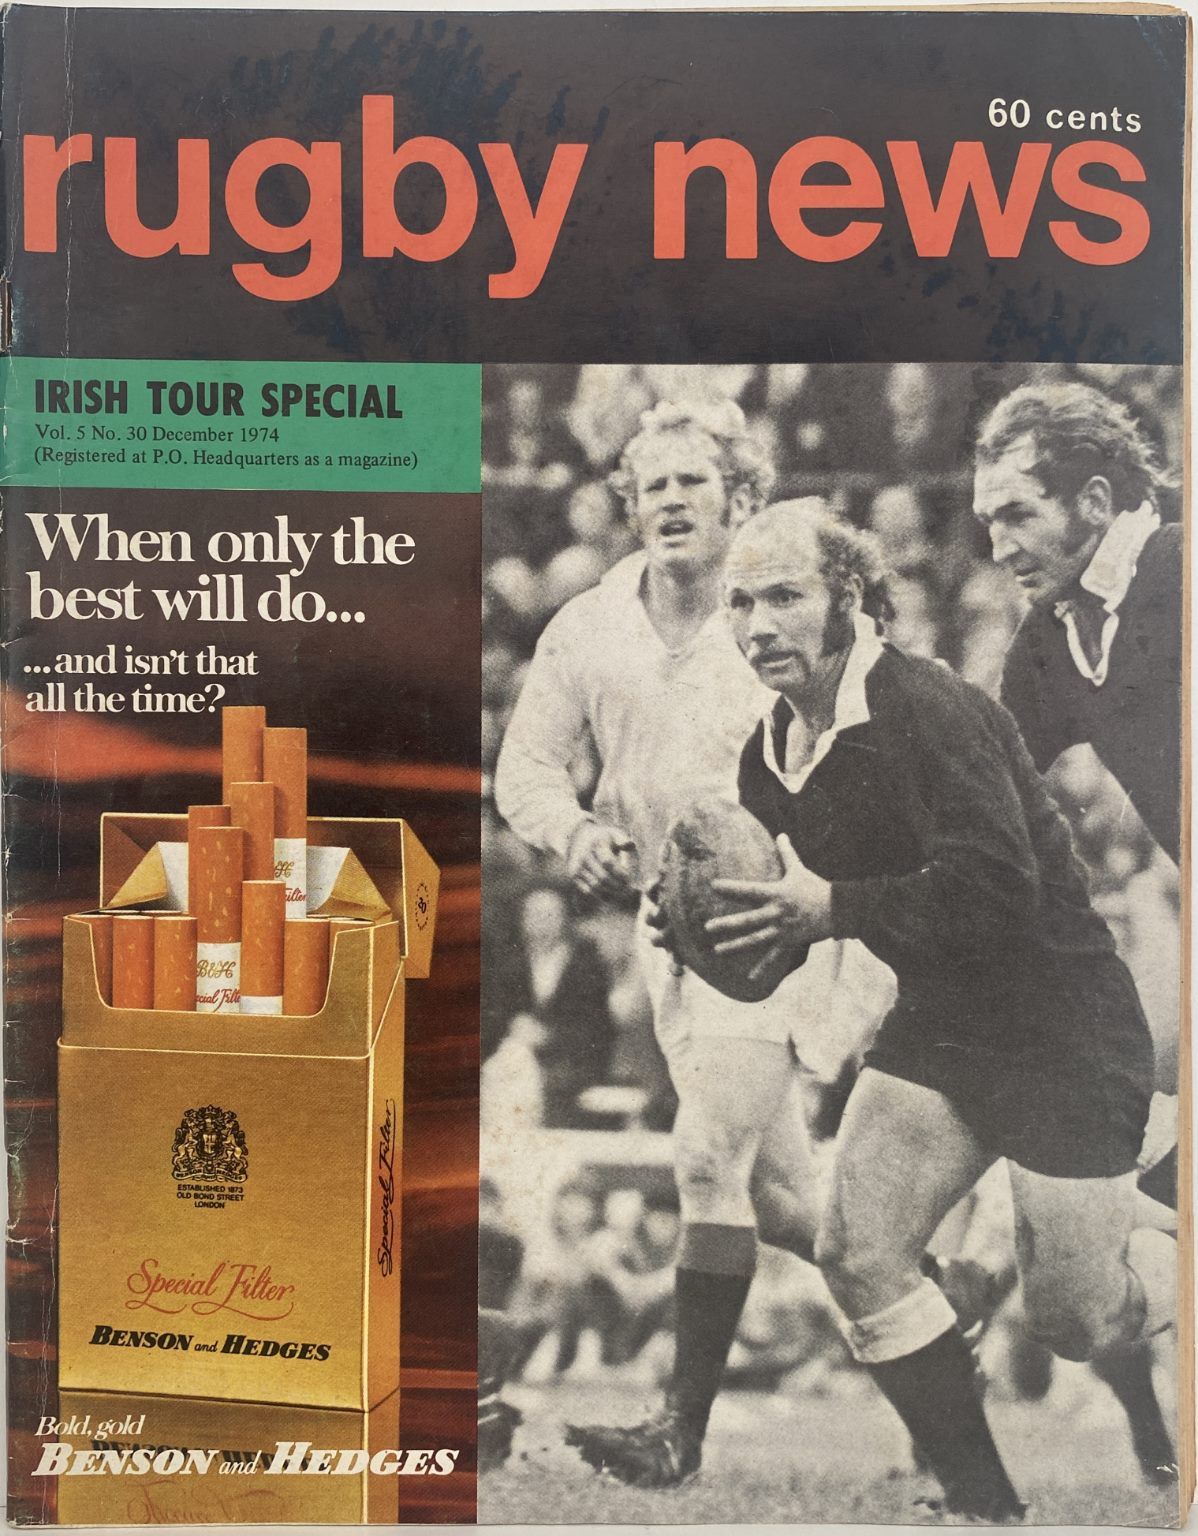 OLD MAGAZINE: Rugby News - Vol. 5, No. 30, December 1974 - Irish Tour Special